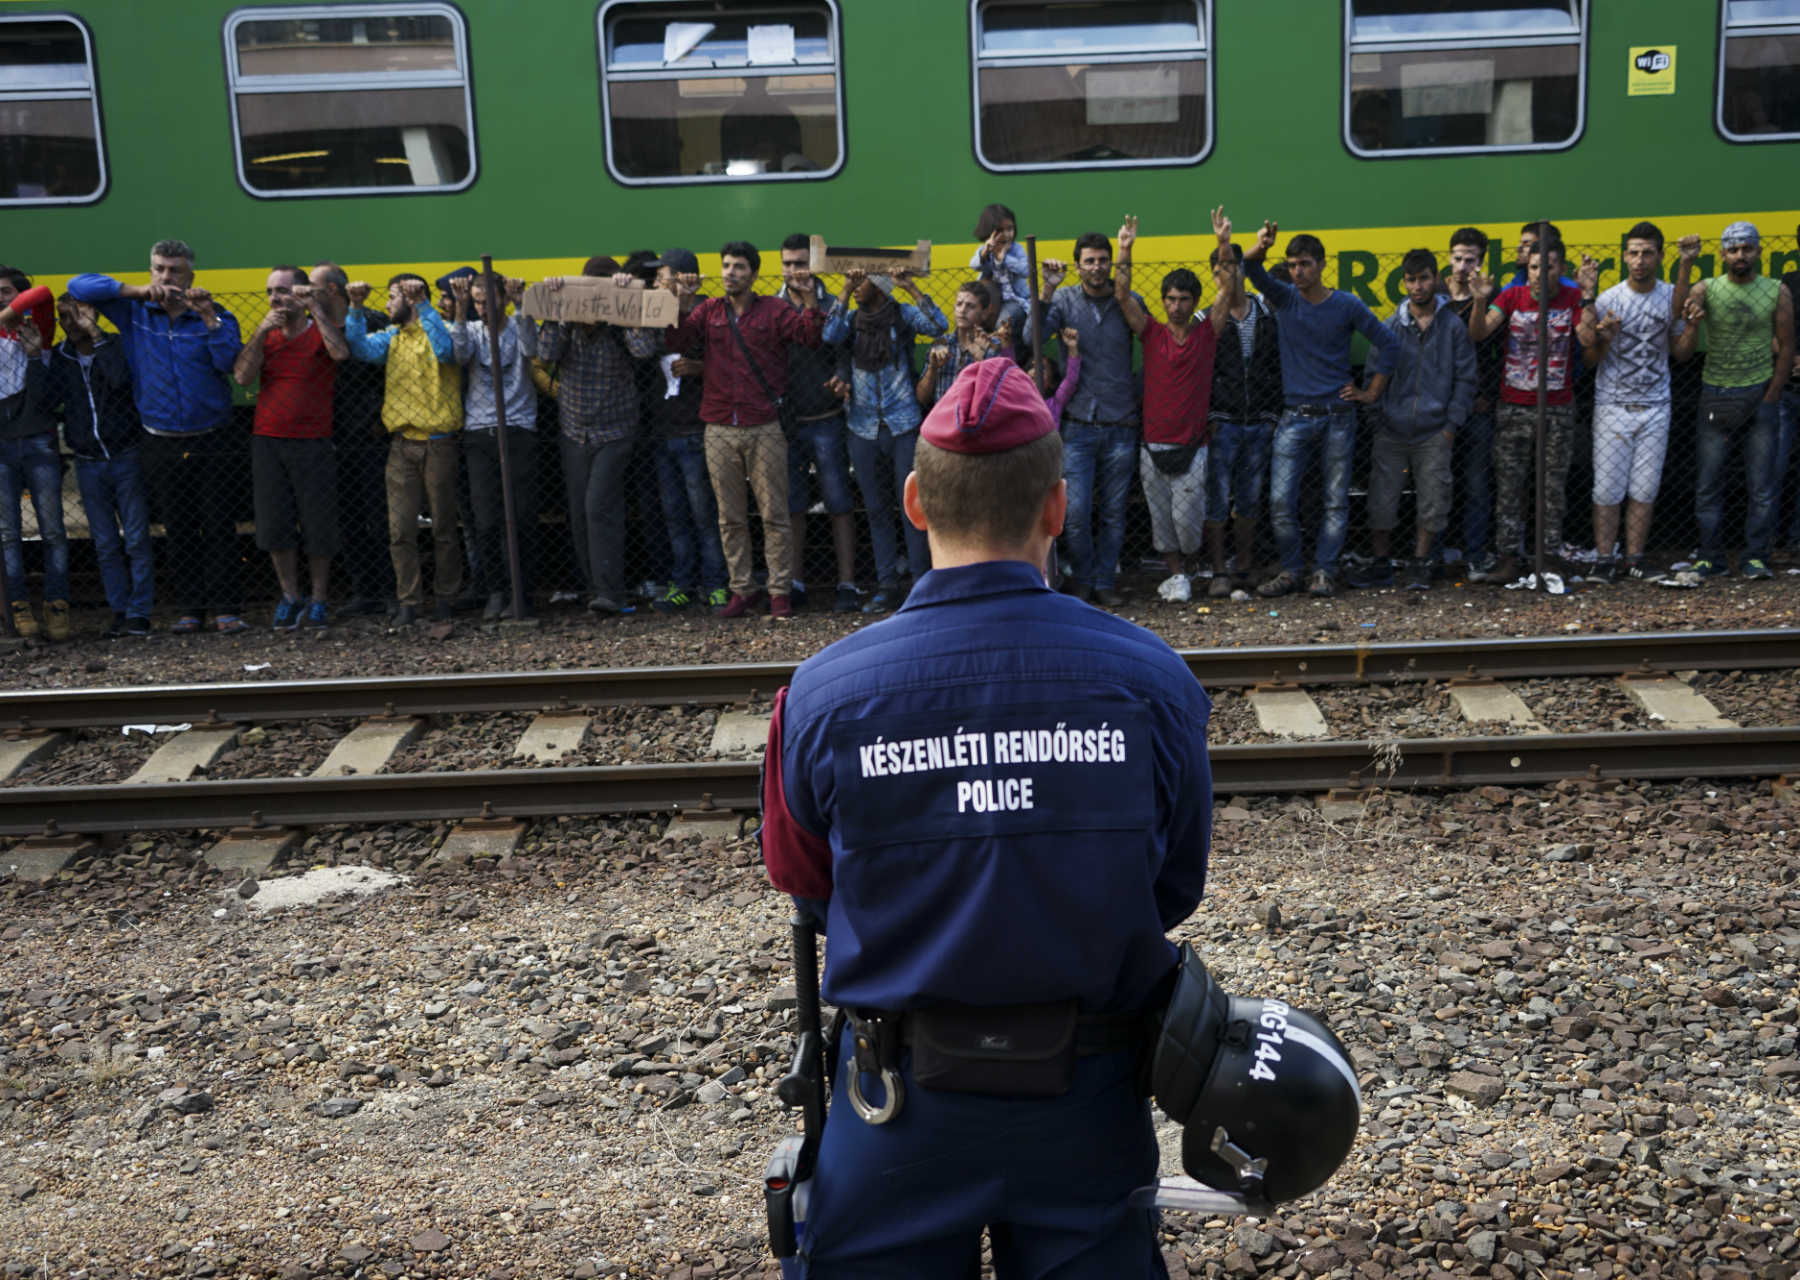 What the Refugee crisis tells us about Europe